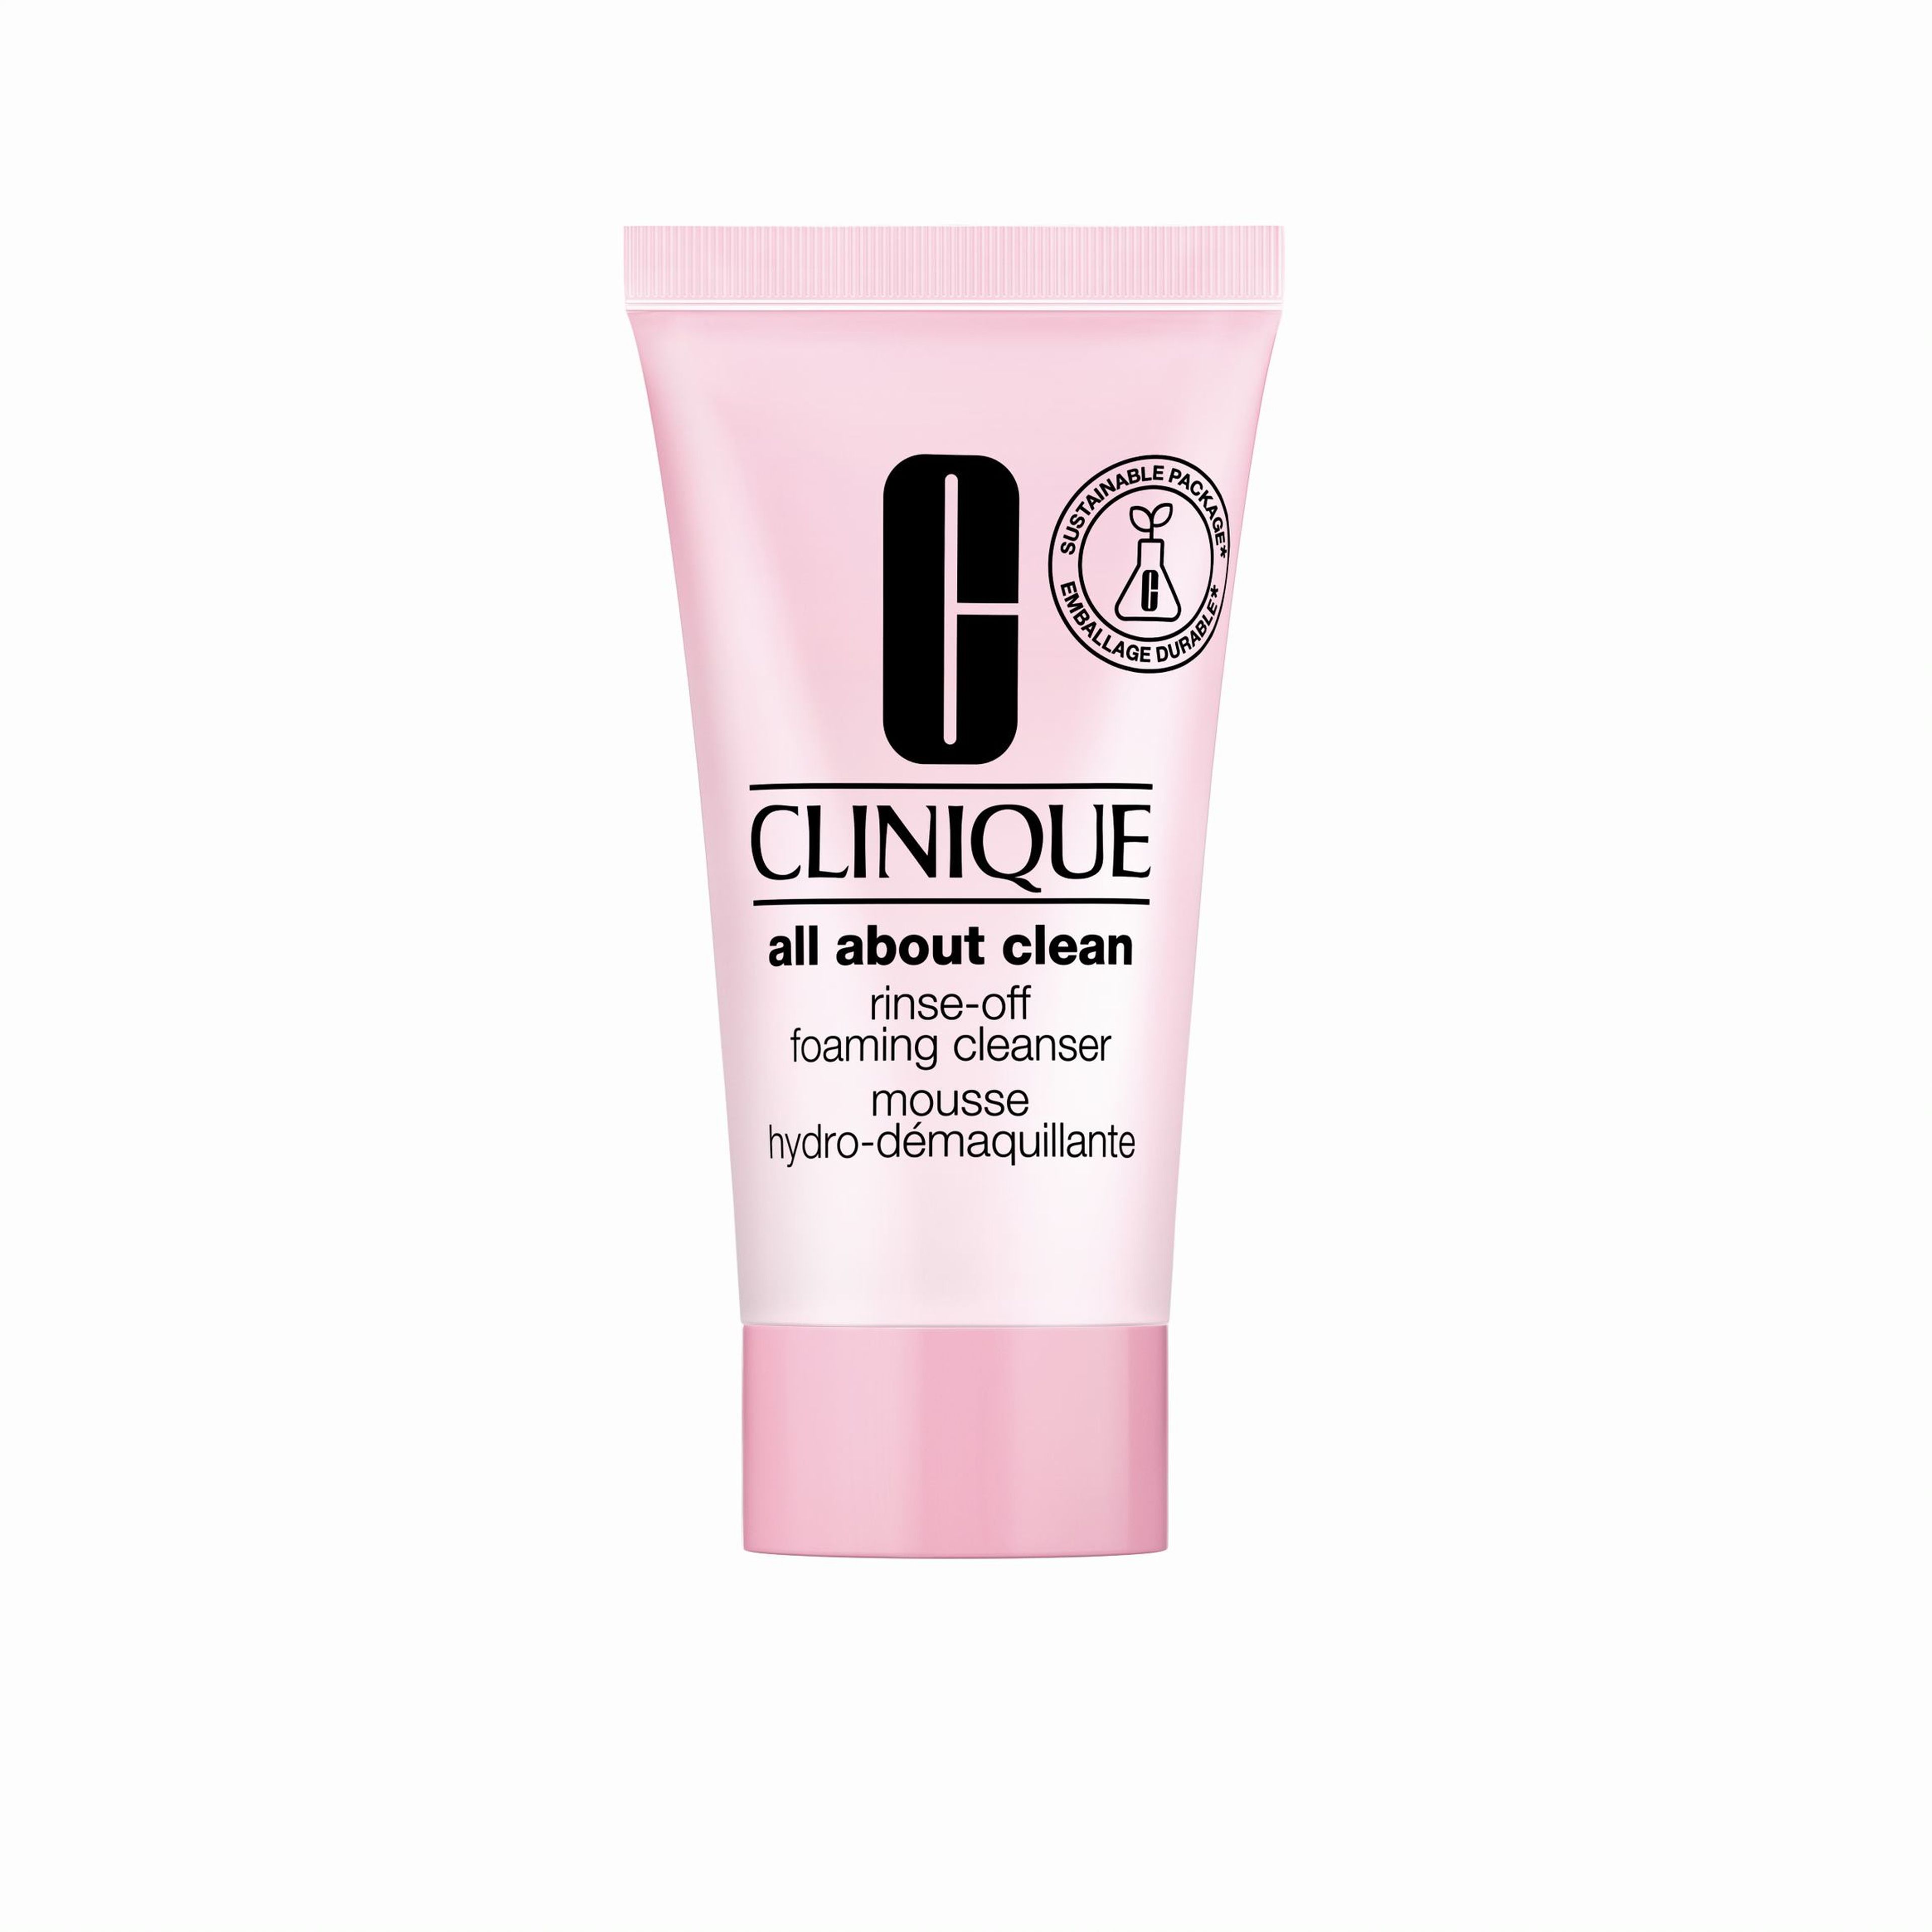 Clinique Rinse-off Foaming Cleanser 1